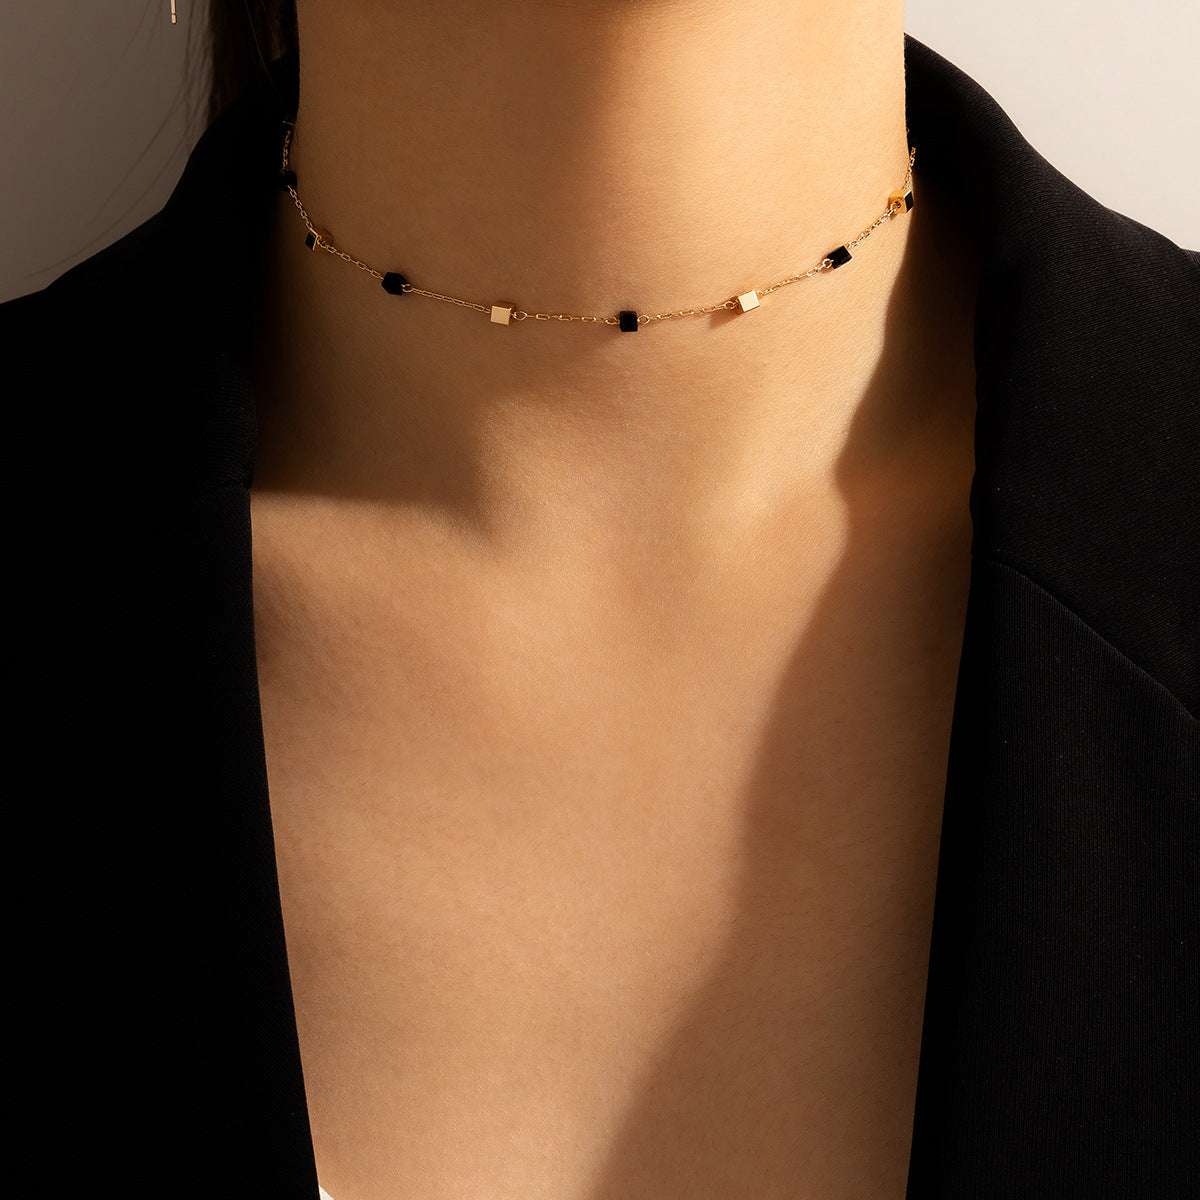 beautiful women's necklace, minimalist jewelry, trendy square necklace - available at Sparq Mart